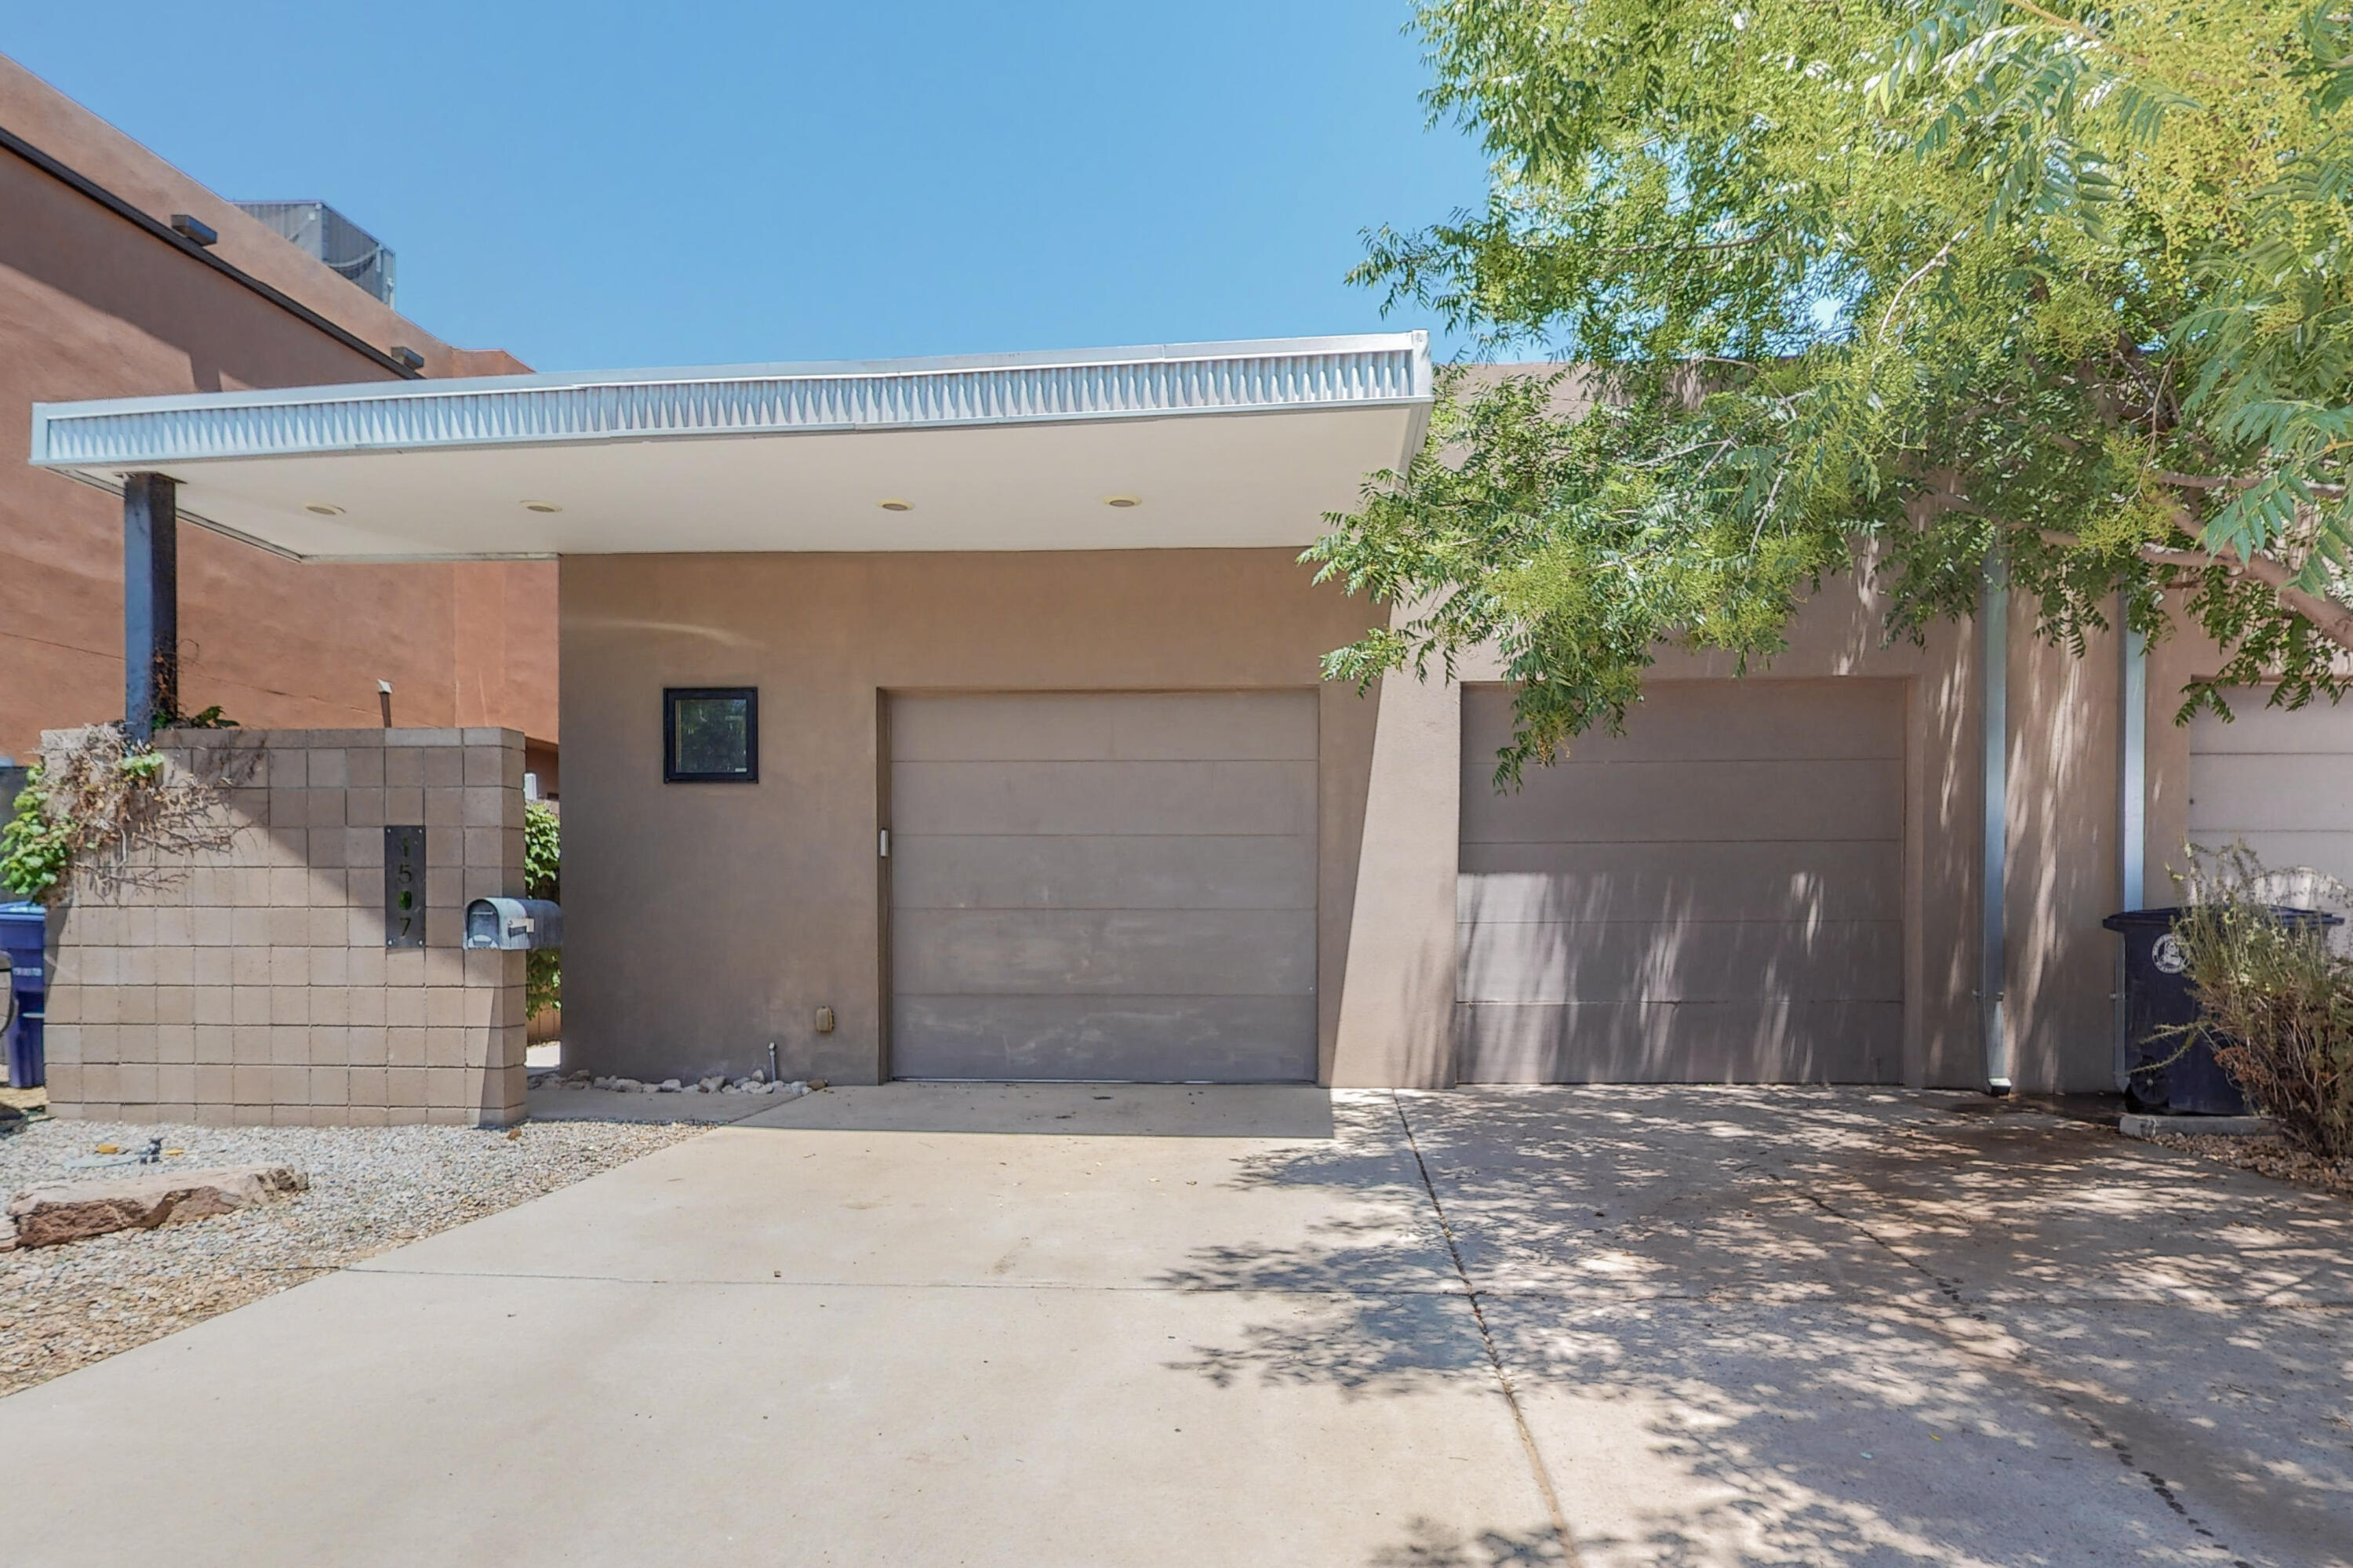 Discover the epitome of Albuquerque living at 1507 San Patricio Ave SW in the historic Huning Castle neighborhood. This 4-bed, 2.5-bath home exudes modern elegance with high ceilings and new vinyl flooring. Large sliding glass doors bathe the interiors in natural light, complementing the cozy ambiance of the gas fireplace. The kitchen, a culinary haven, boasts a breakfast bar area, tons of space, and a beautiful open floor plan. The master suite features an amazing walk-in closet. Ideally located, enjoy quick access to Old Town, Tingly Beach, the Country Club, the Zoo, and downtown--all within 5 minutes. With a seamless blend of historical charm and contemporary comforts, this residence is a unique opportunity to call Albuquerque home.